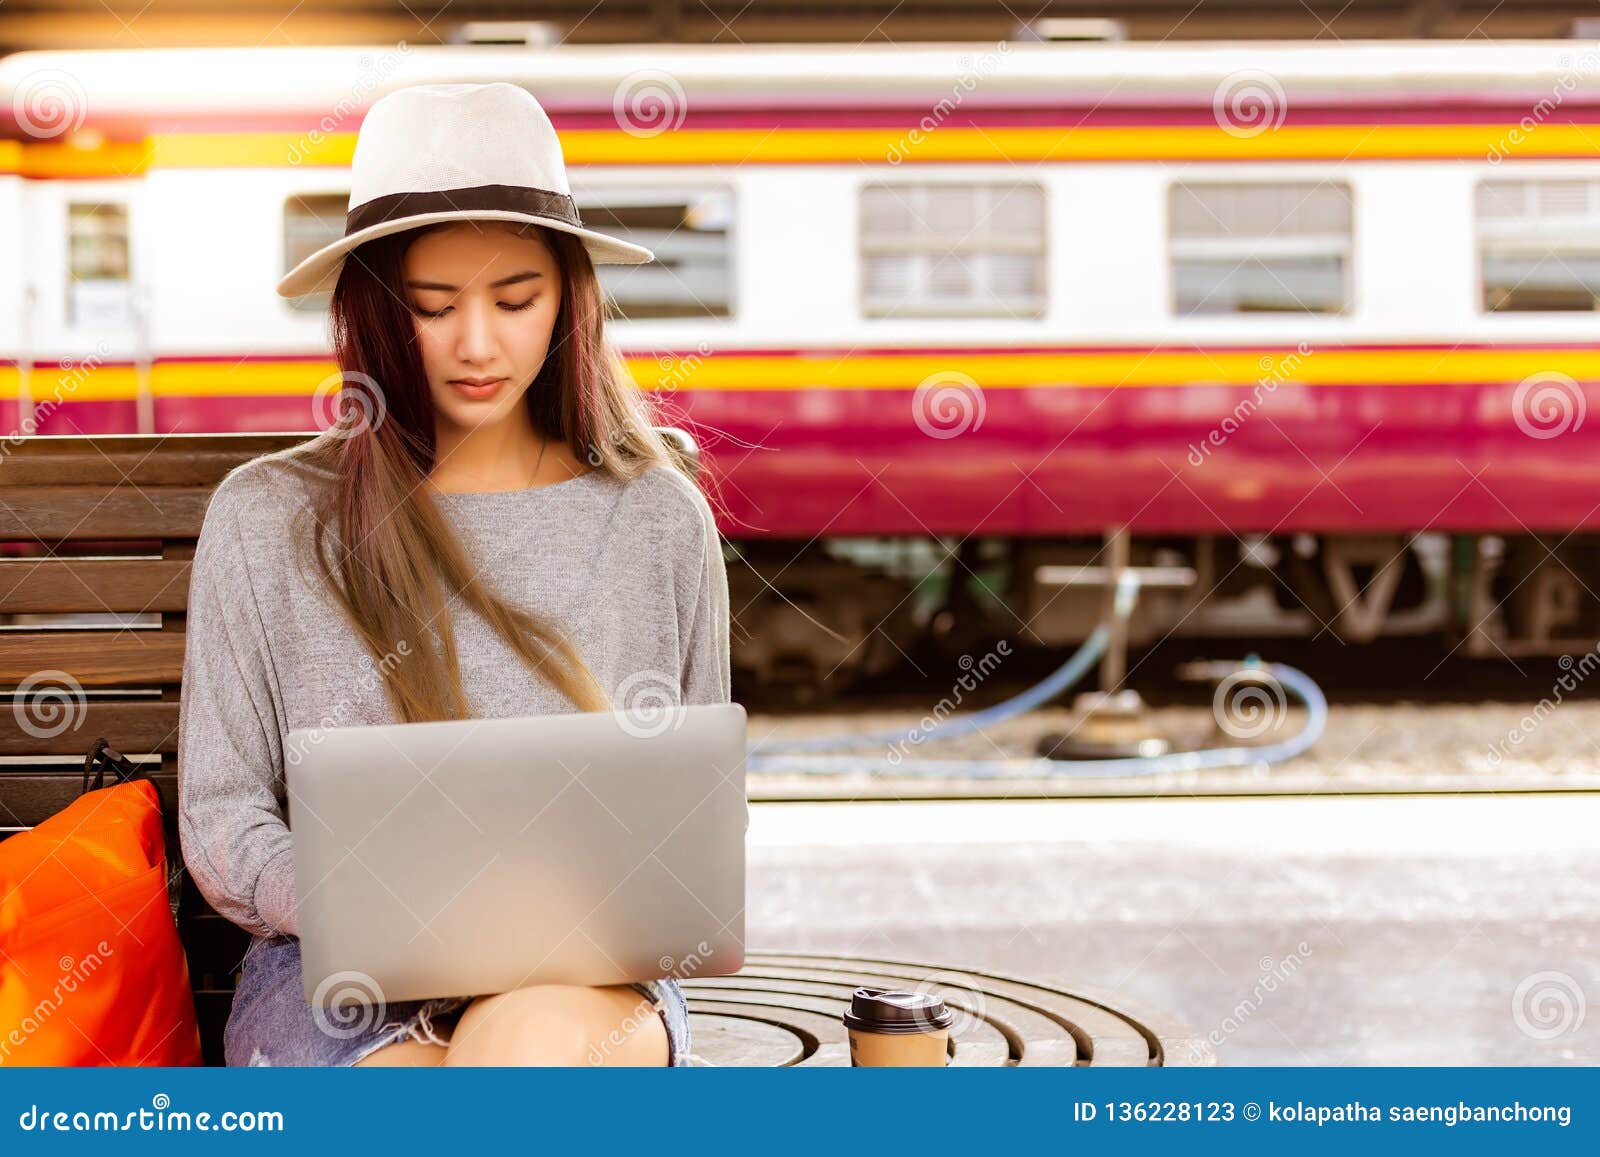 beautiful woman is using laptop at train station before charming beautiful asian woman travel to destination. she is a blogger and